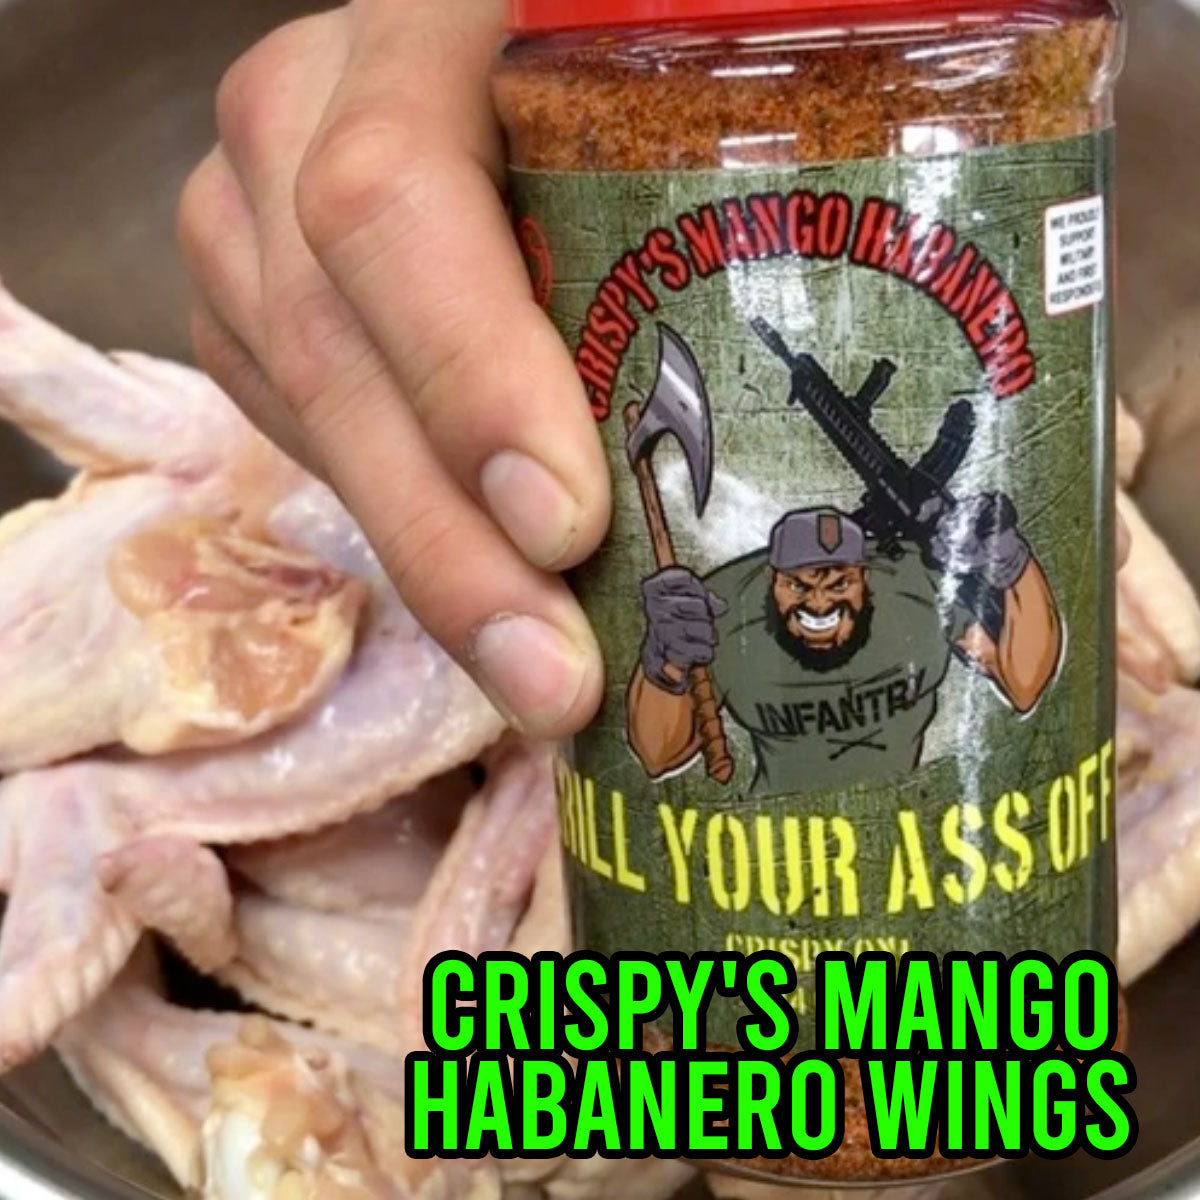 Crispy's Mango Habanero Wings | Grill Your Ass Off